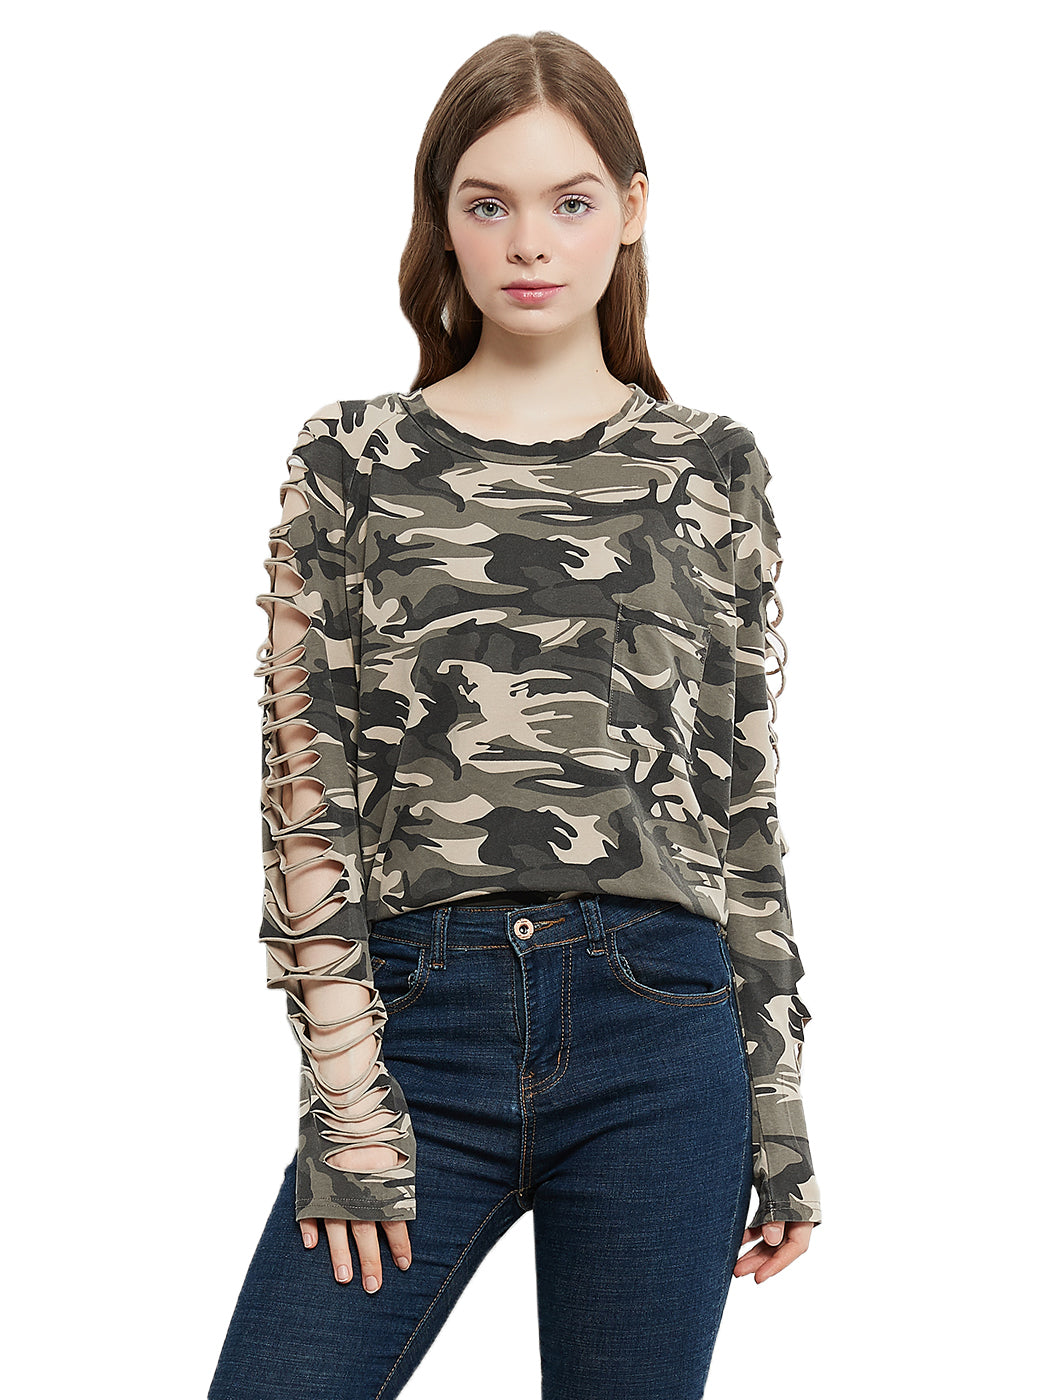 Ripped Long-Sleeve Pullover Top With Frayed Layers - ALILANG.COM